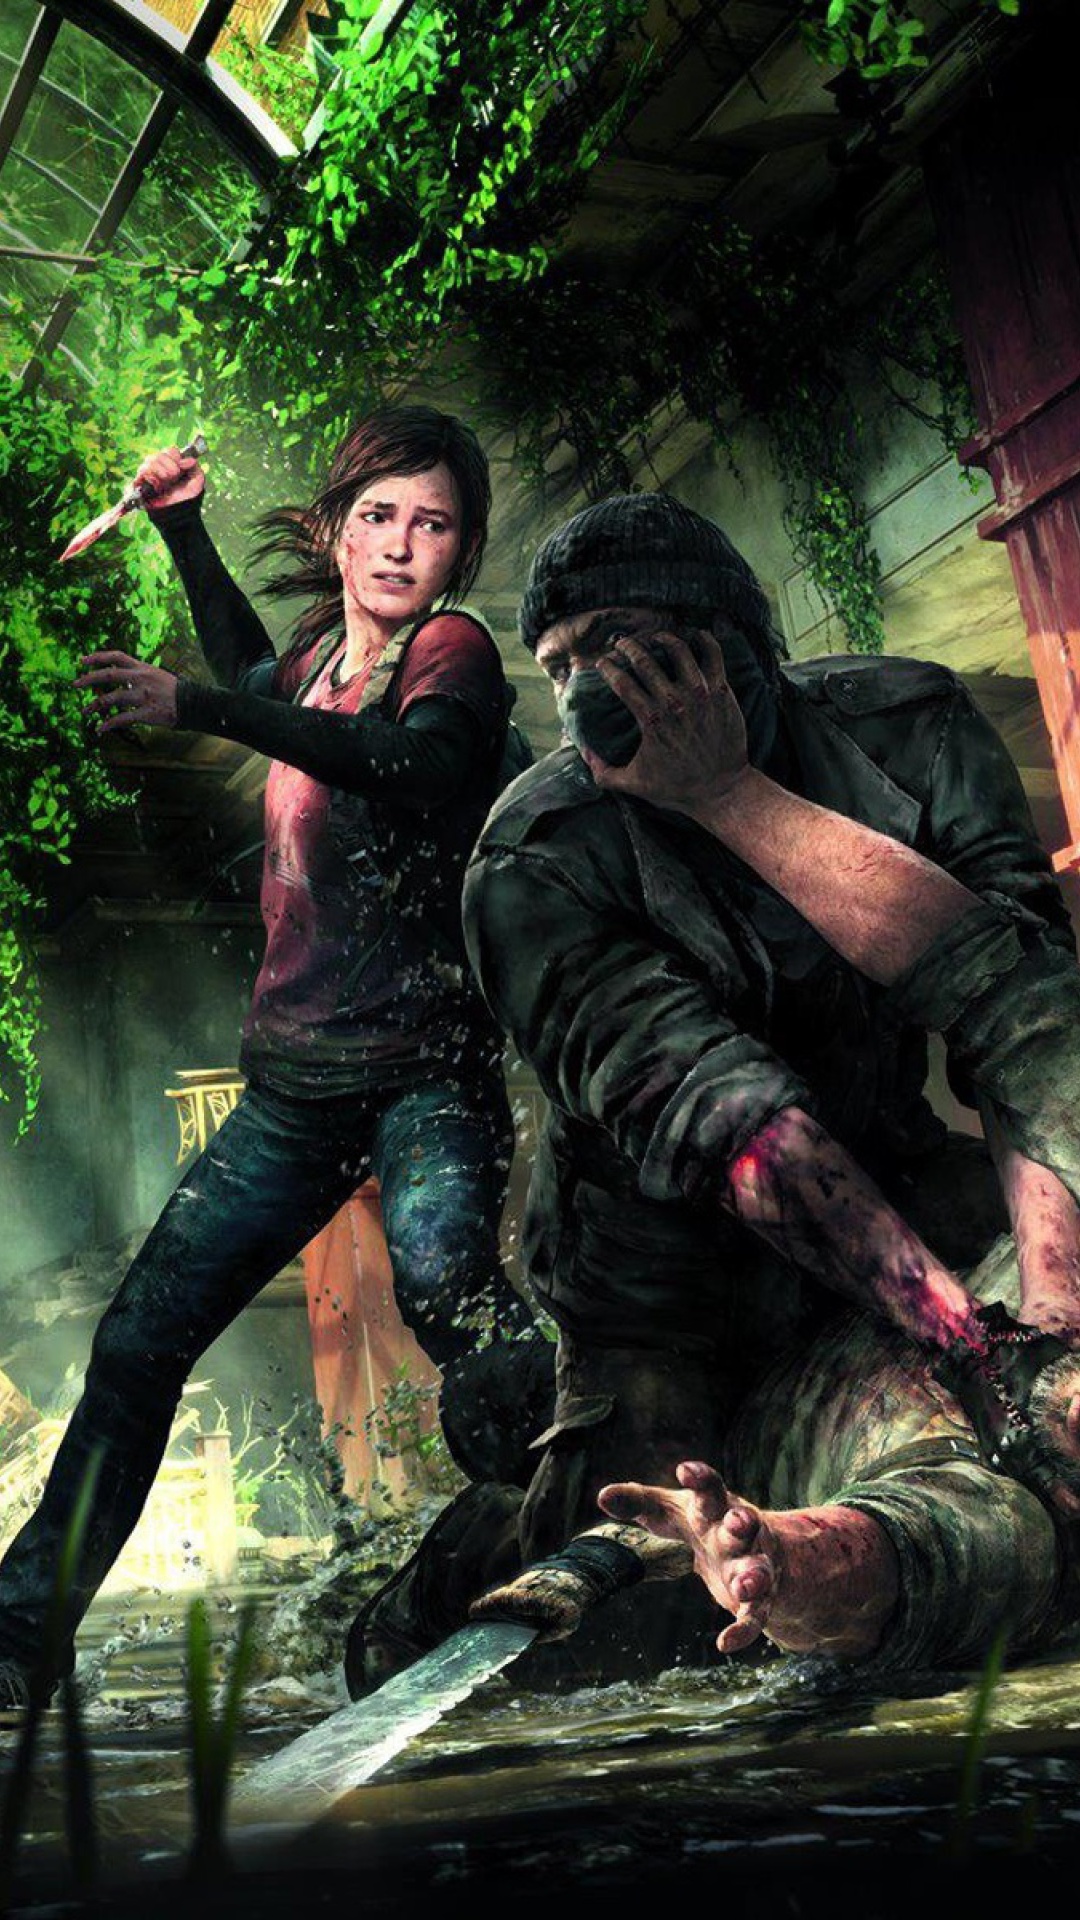 The Last Of Us Naughty Dog for Playstation 3 screenshot #1 1080x1920